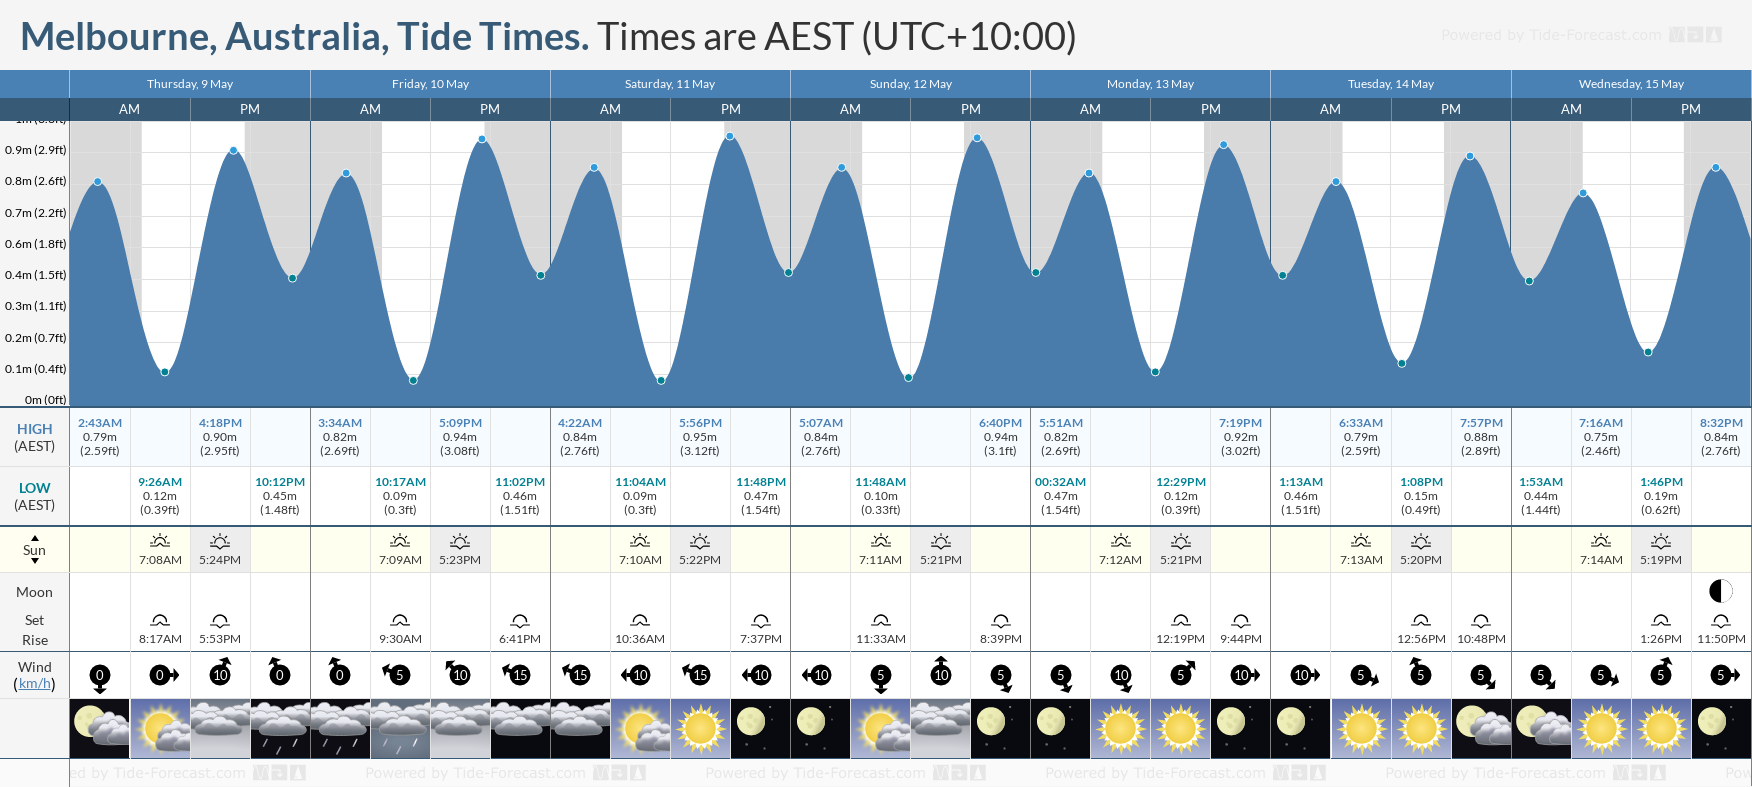 Melbourne, Australia Tide Chart including high and low tide times for the next 7 days